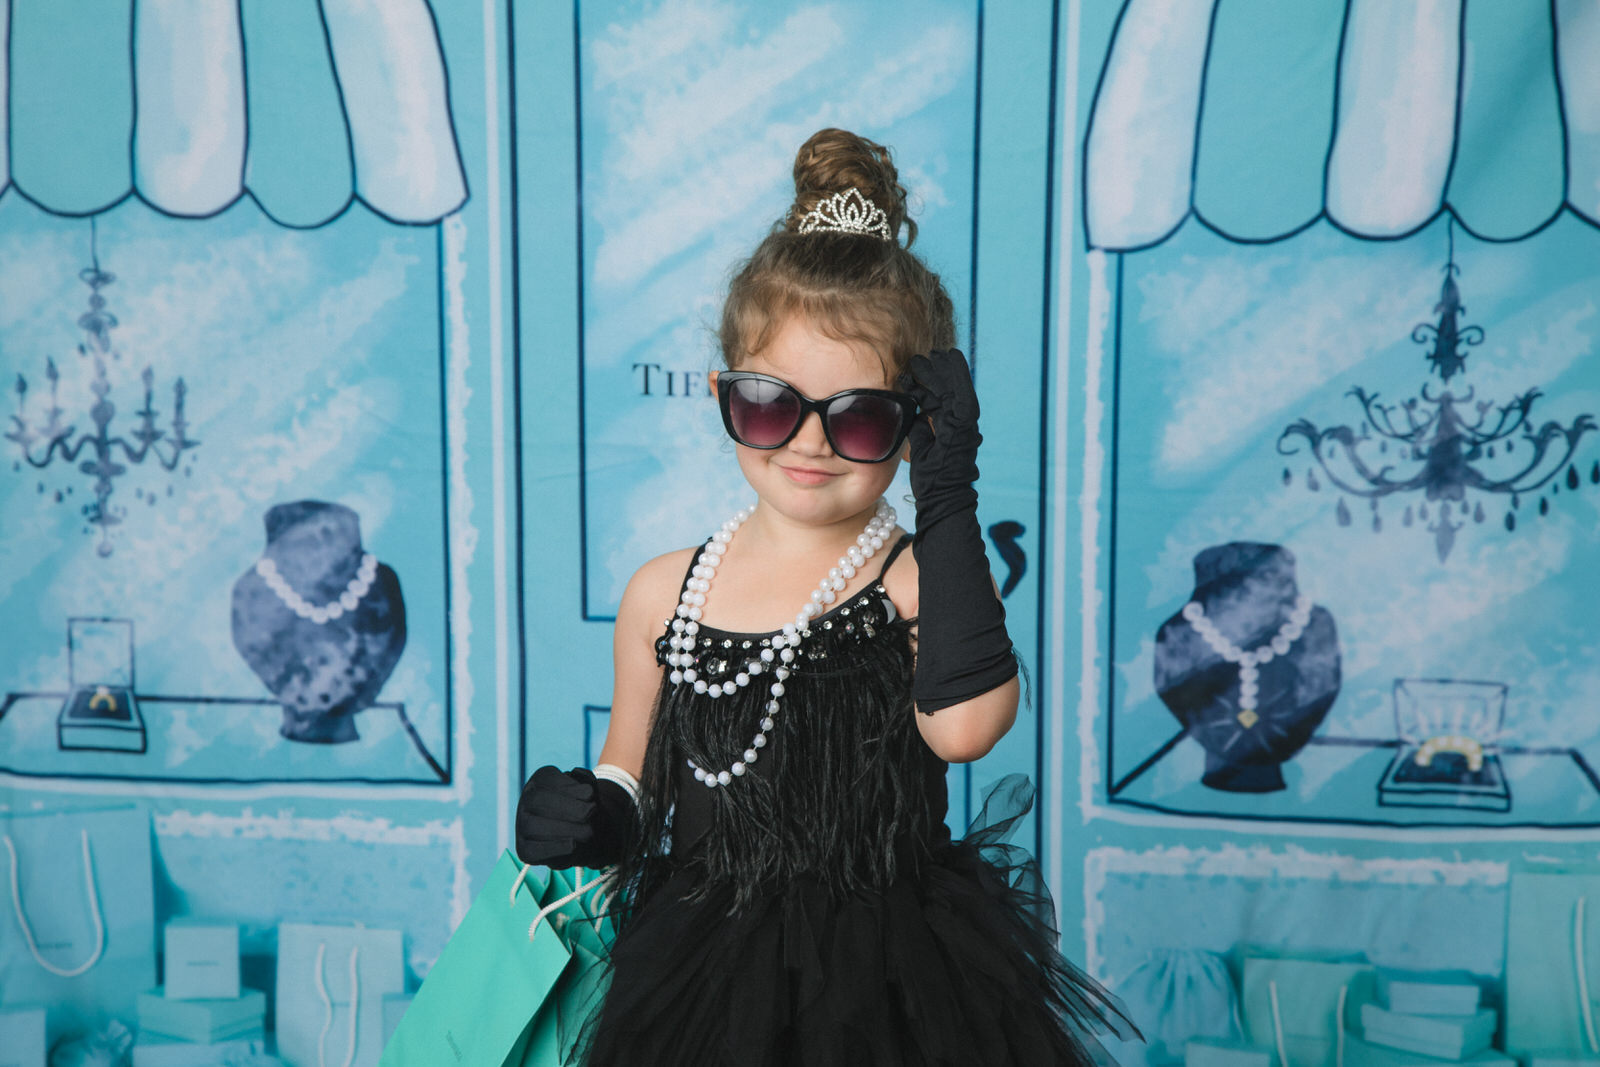 A young girl in a black flapper dress and large sunglasses holds a shopping bag in a studio